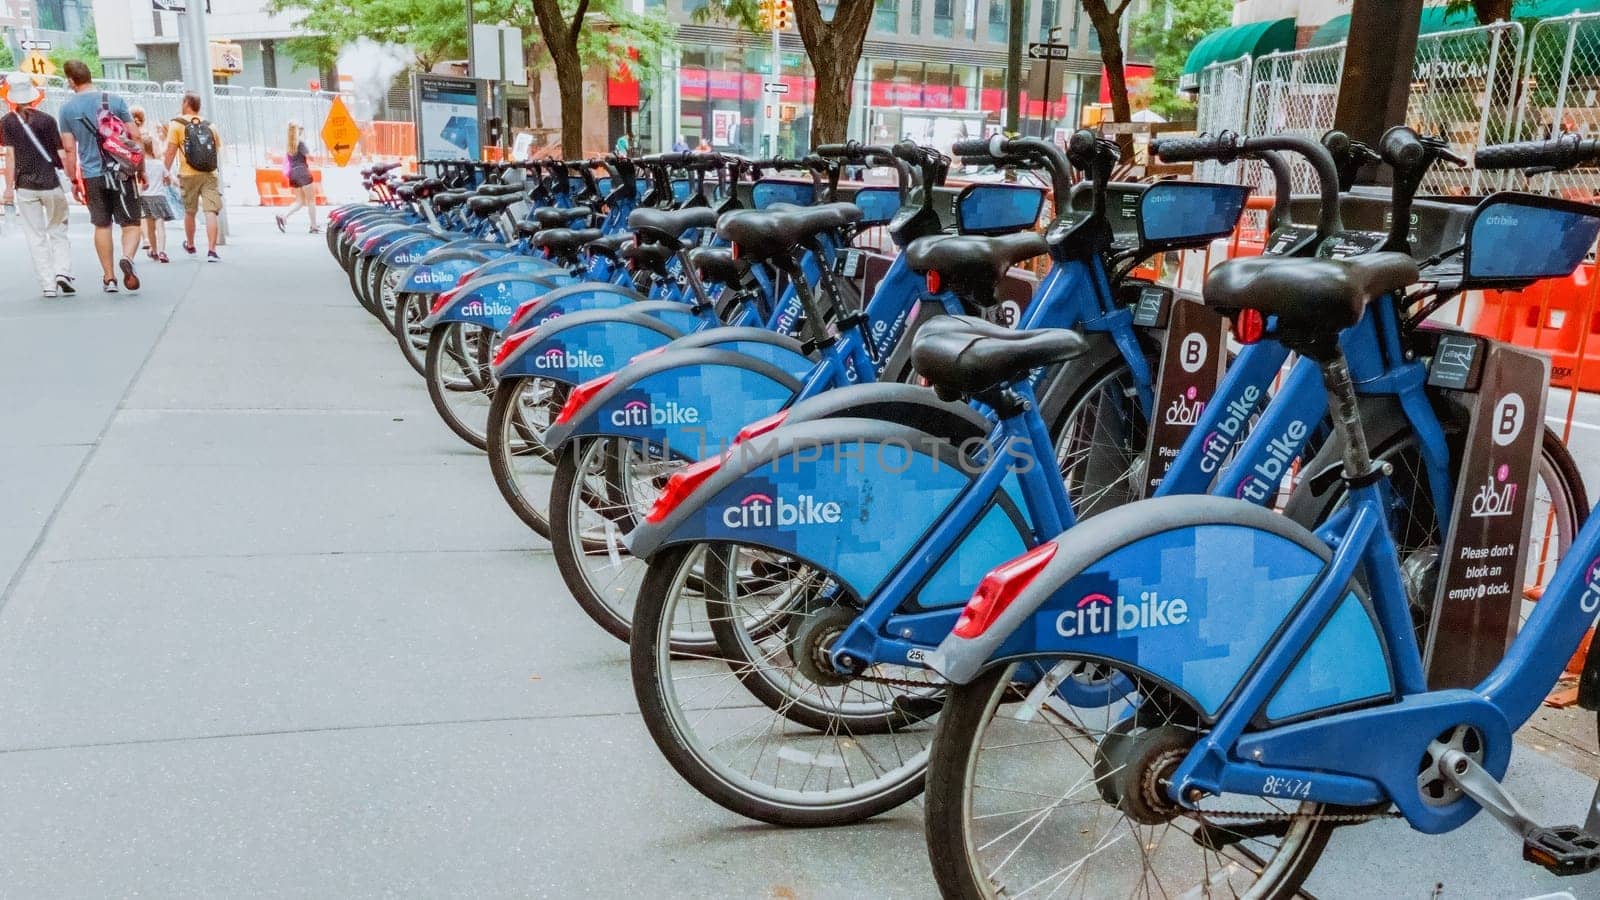 A row of vibrant blue bicycles neatly lined up on a bustling city street. Pedestrians walk by as tall buildings form a picturesque urban backdrop, creating a colorful scene in the city environment.